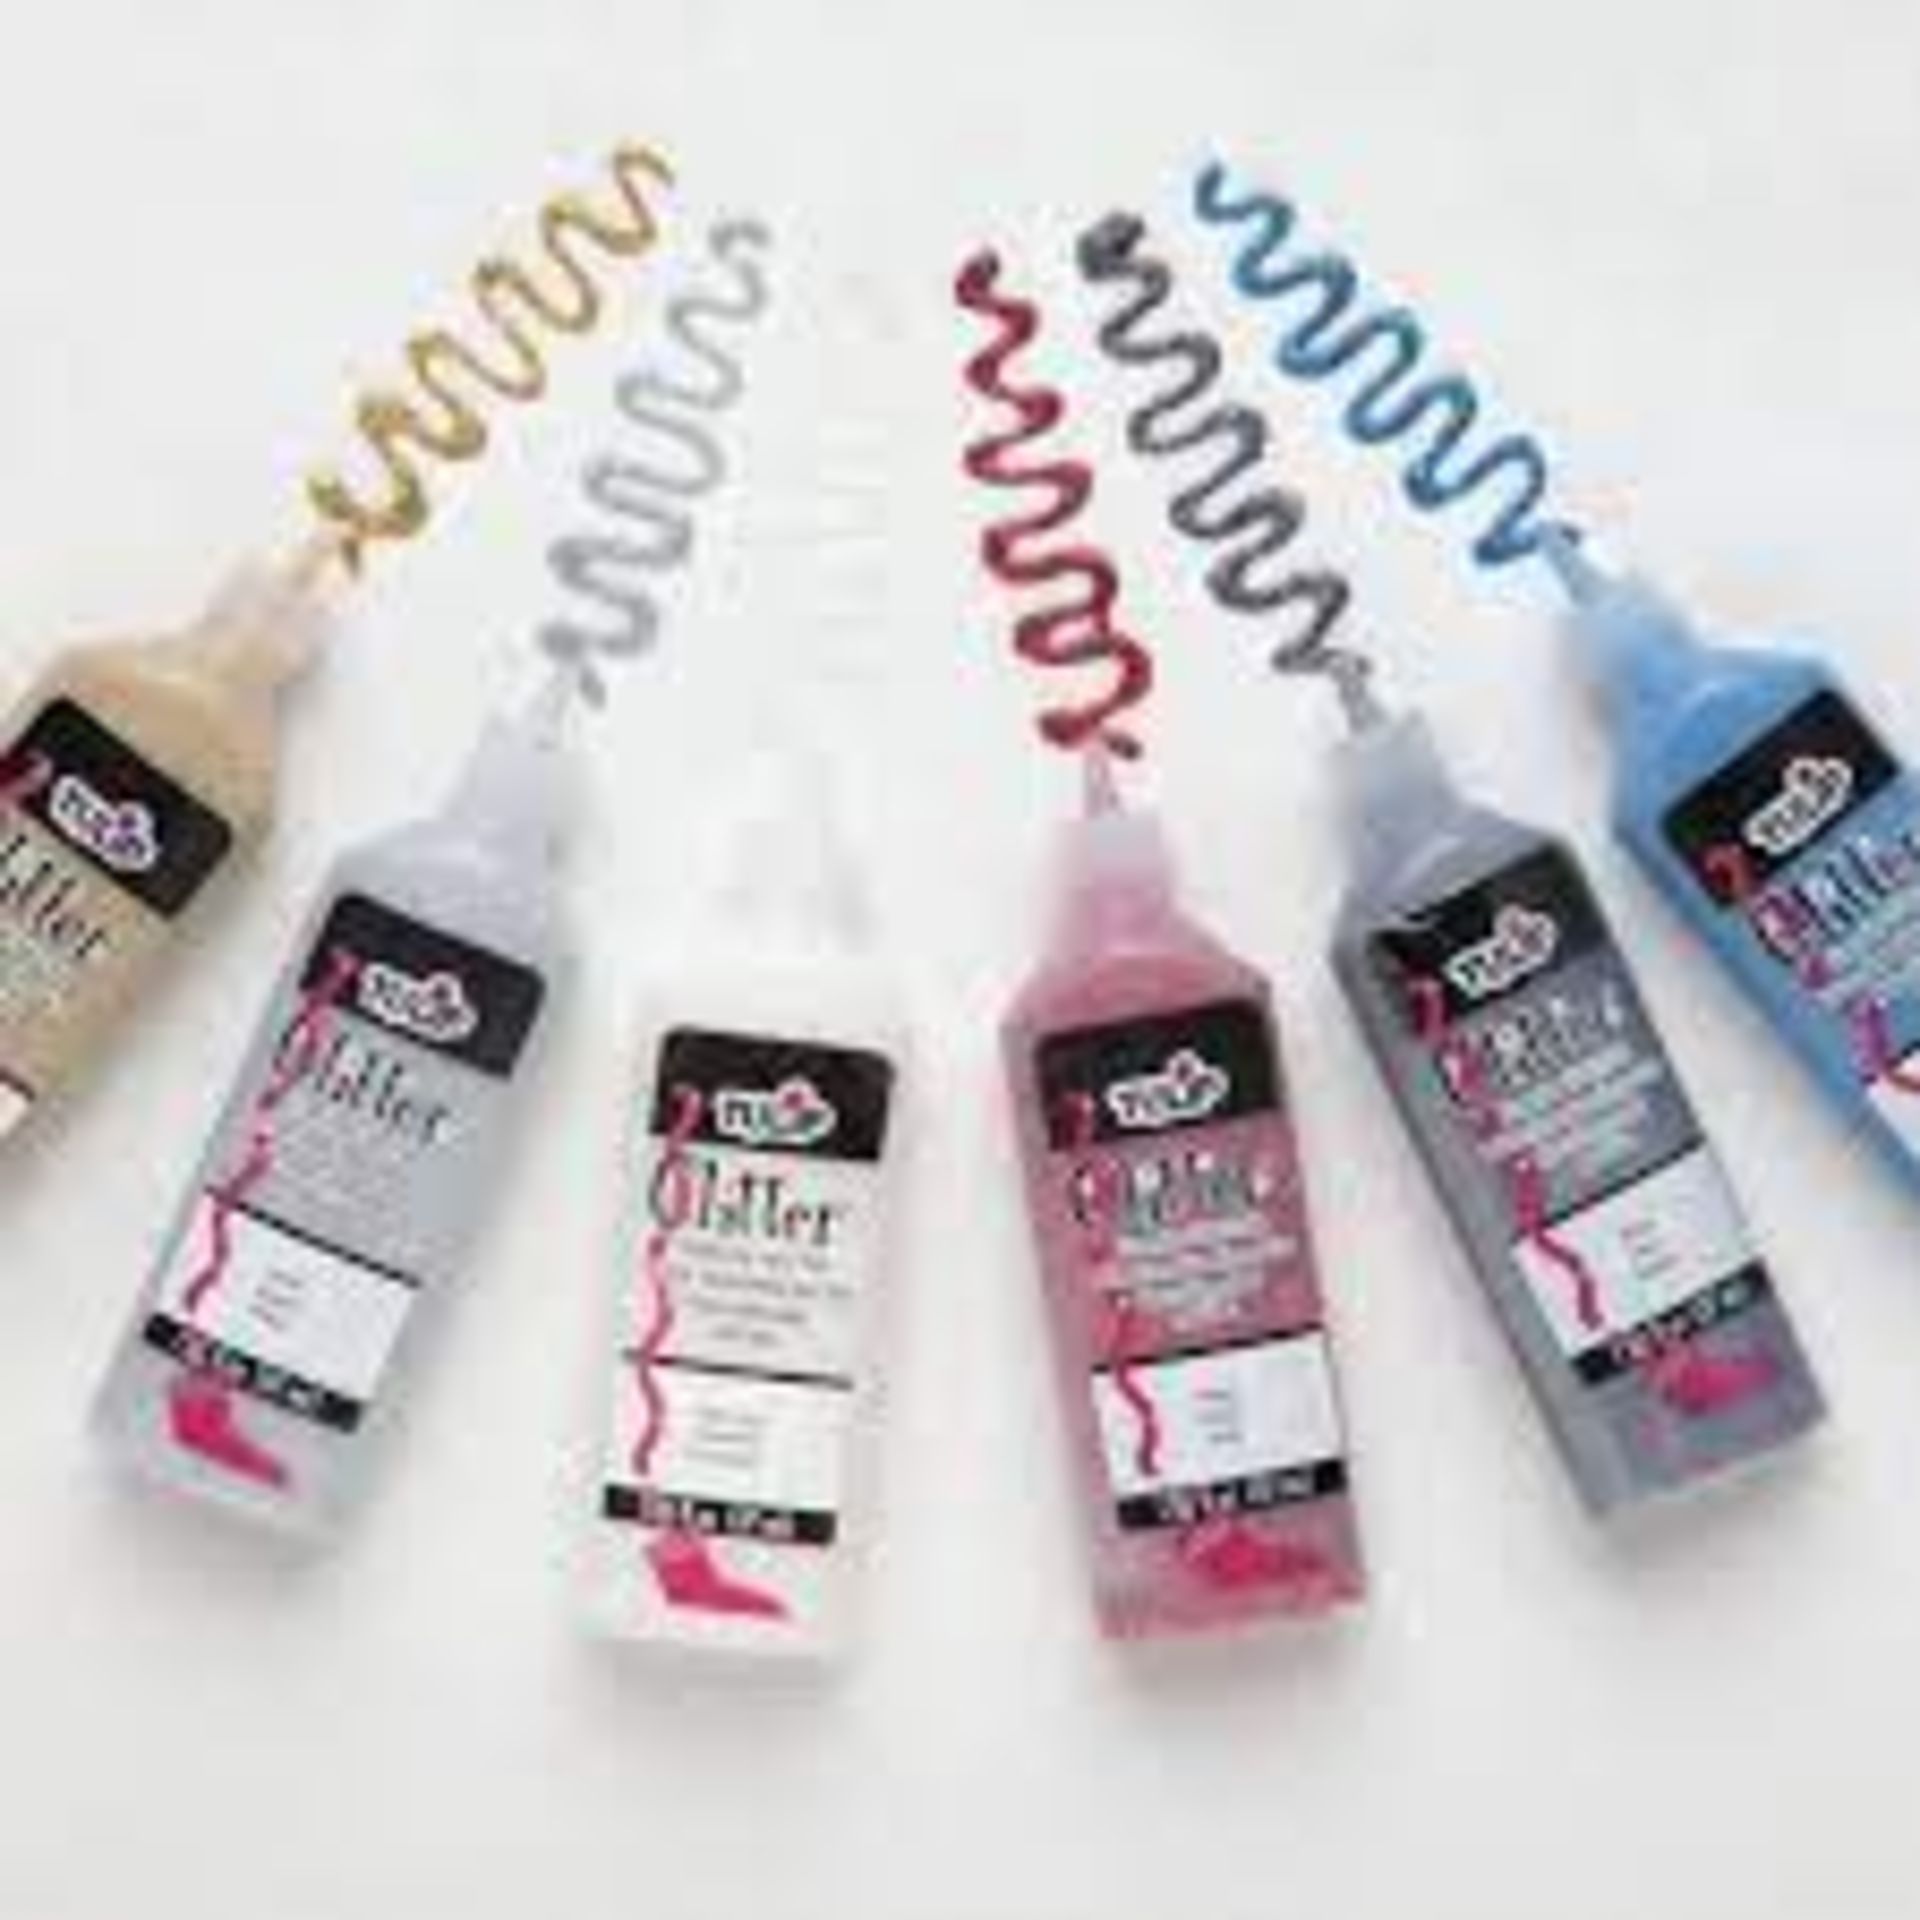 8073 X BRAND NEW TULIP FABRIC PAINTS IN VARIOUS COLOURS TOTAL RRP £28,255